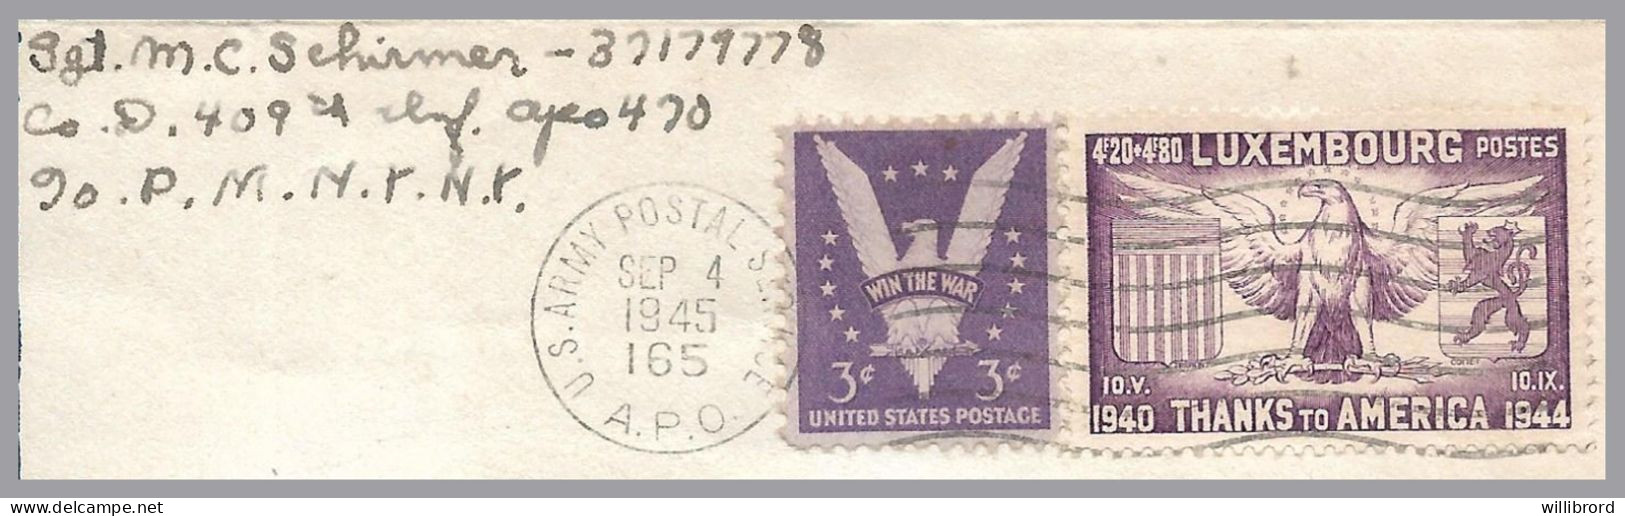 LUXEMBOURG - USA 1945 - US APO 165 [St. Villary En Caux, France] - 4.20F+4.80F Thanks To America With 3c US Victory - Briefe U. Dokumente